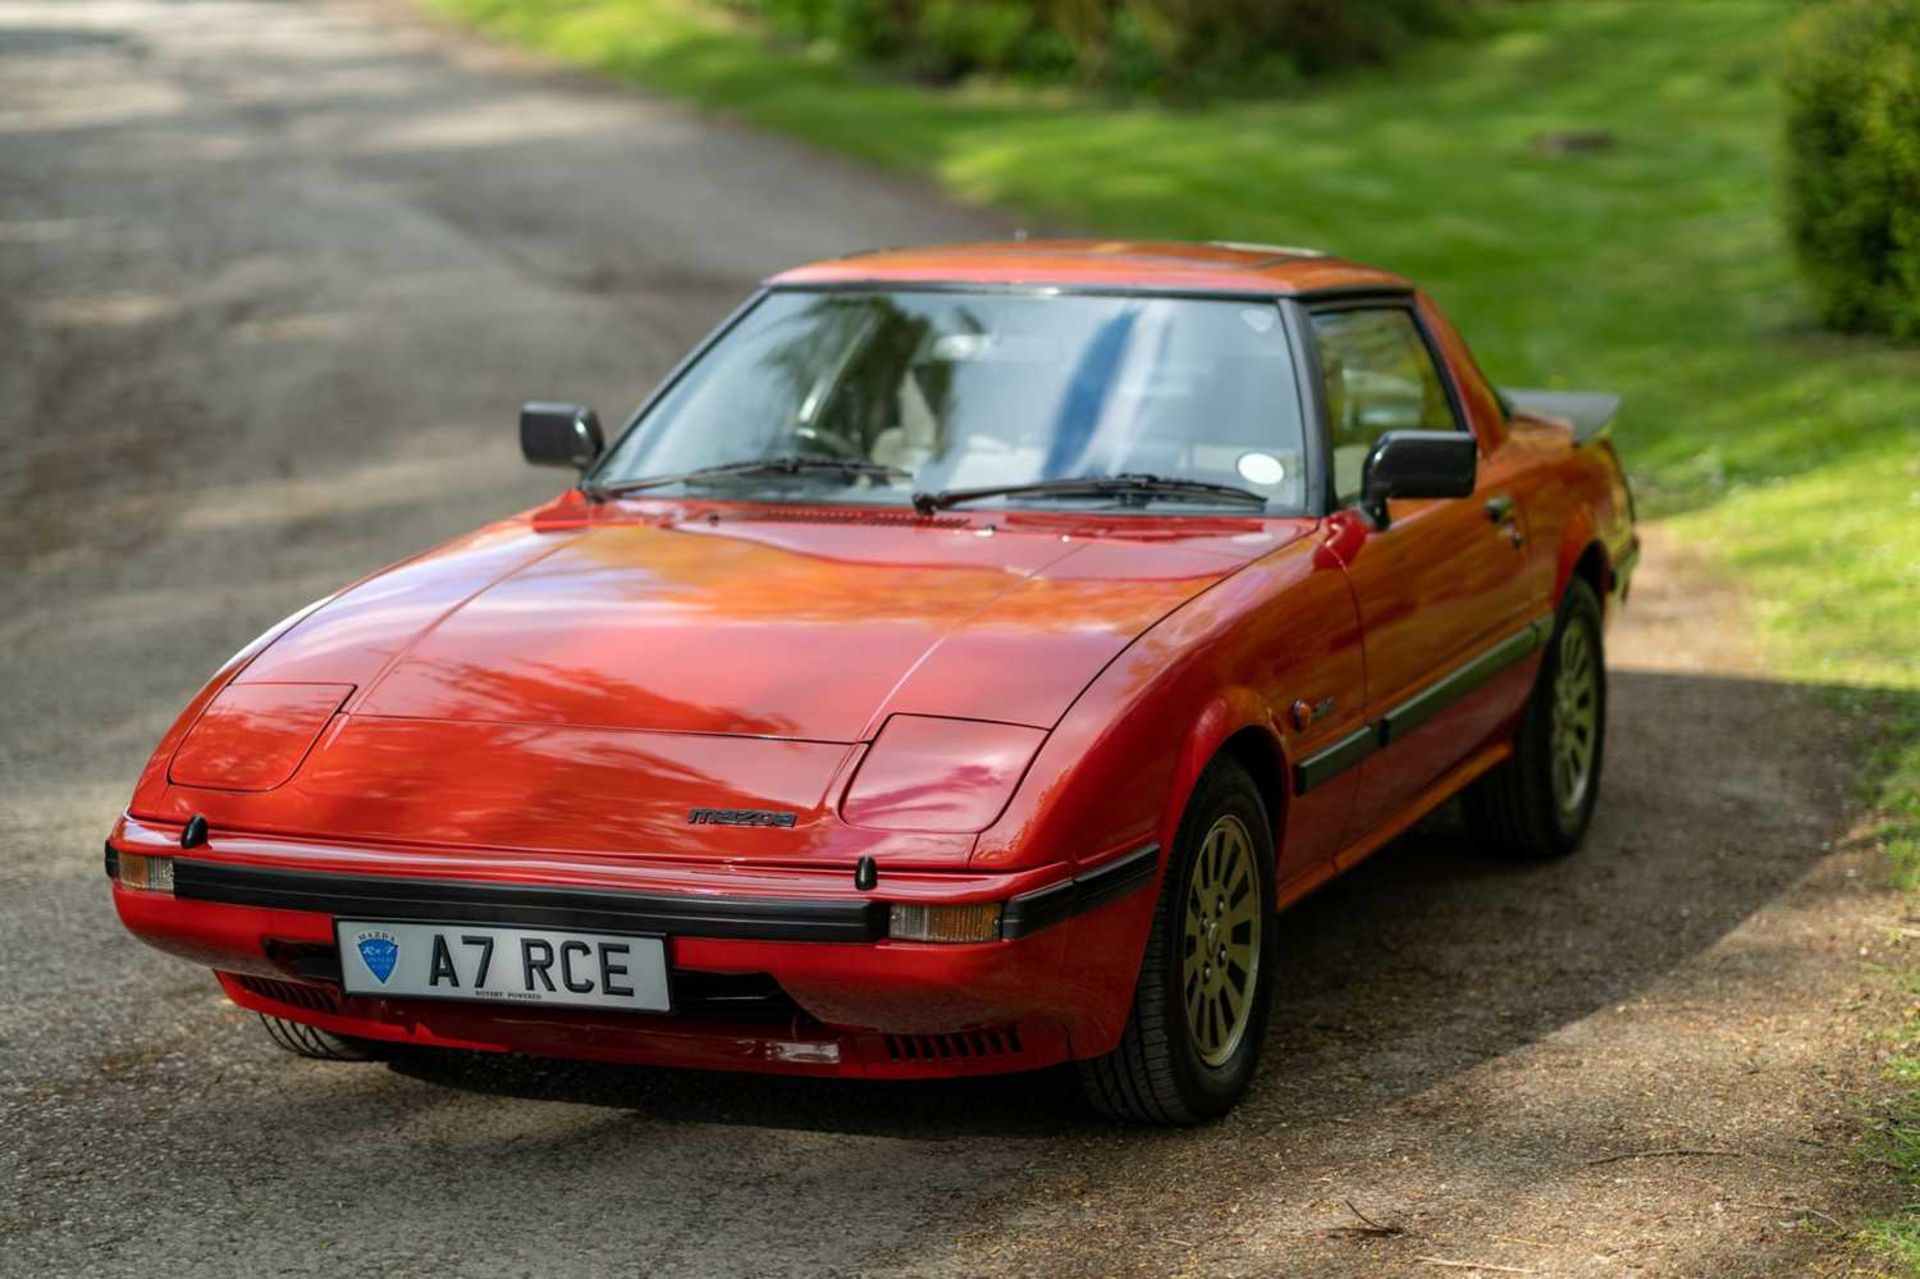 1984 Mazda RX7 Rare first generation model, consigned from long-term ownership recently featured in - Image 3 of 56